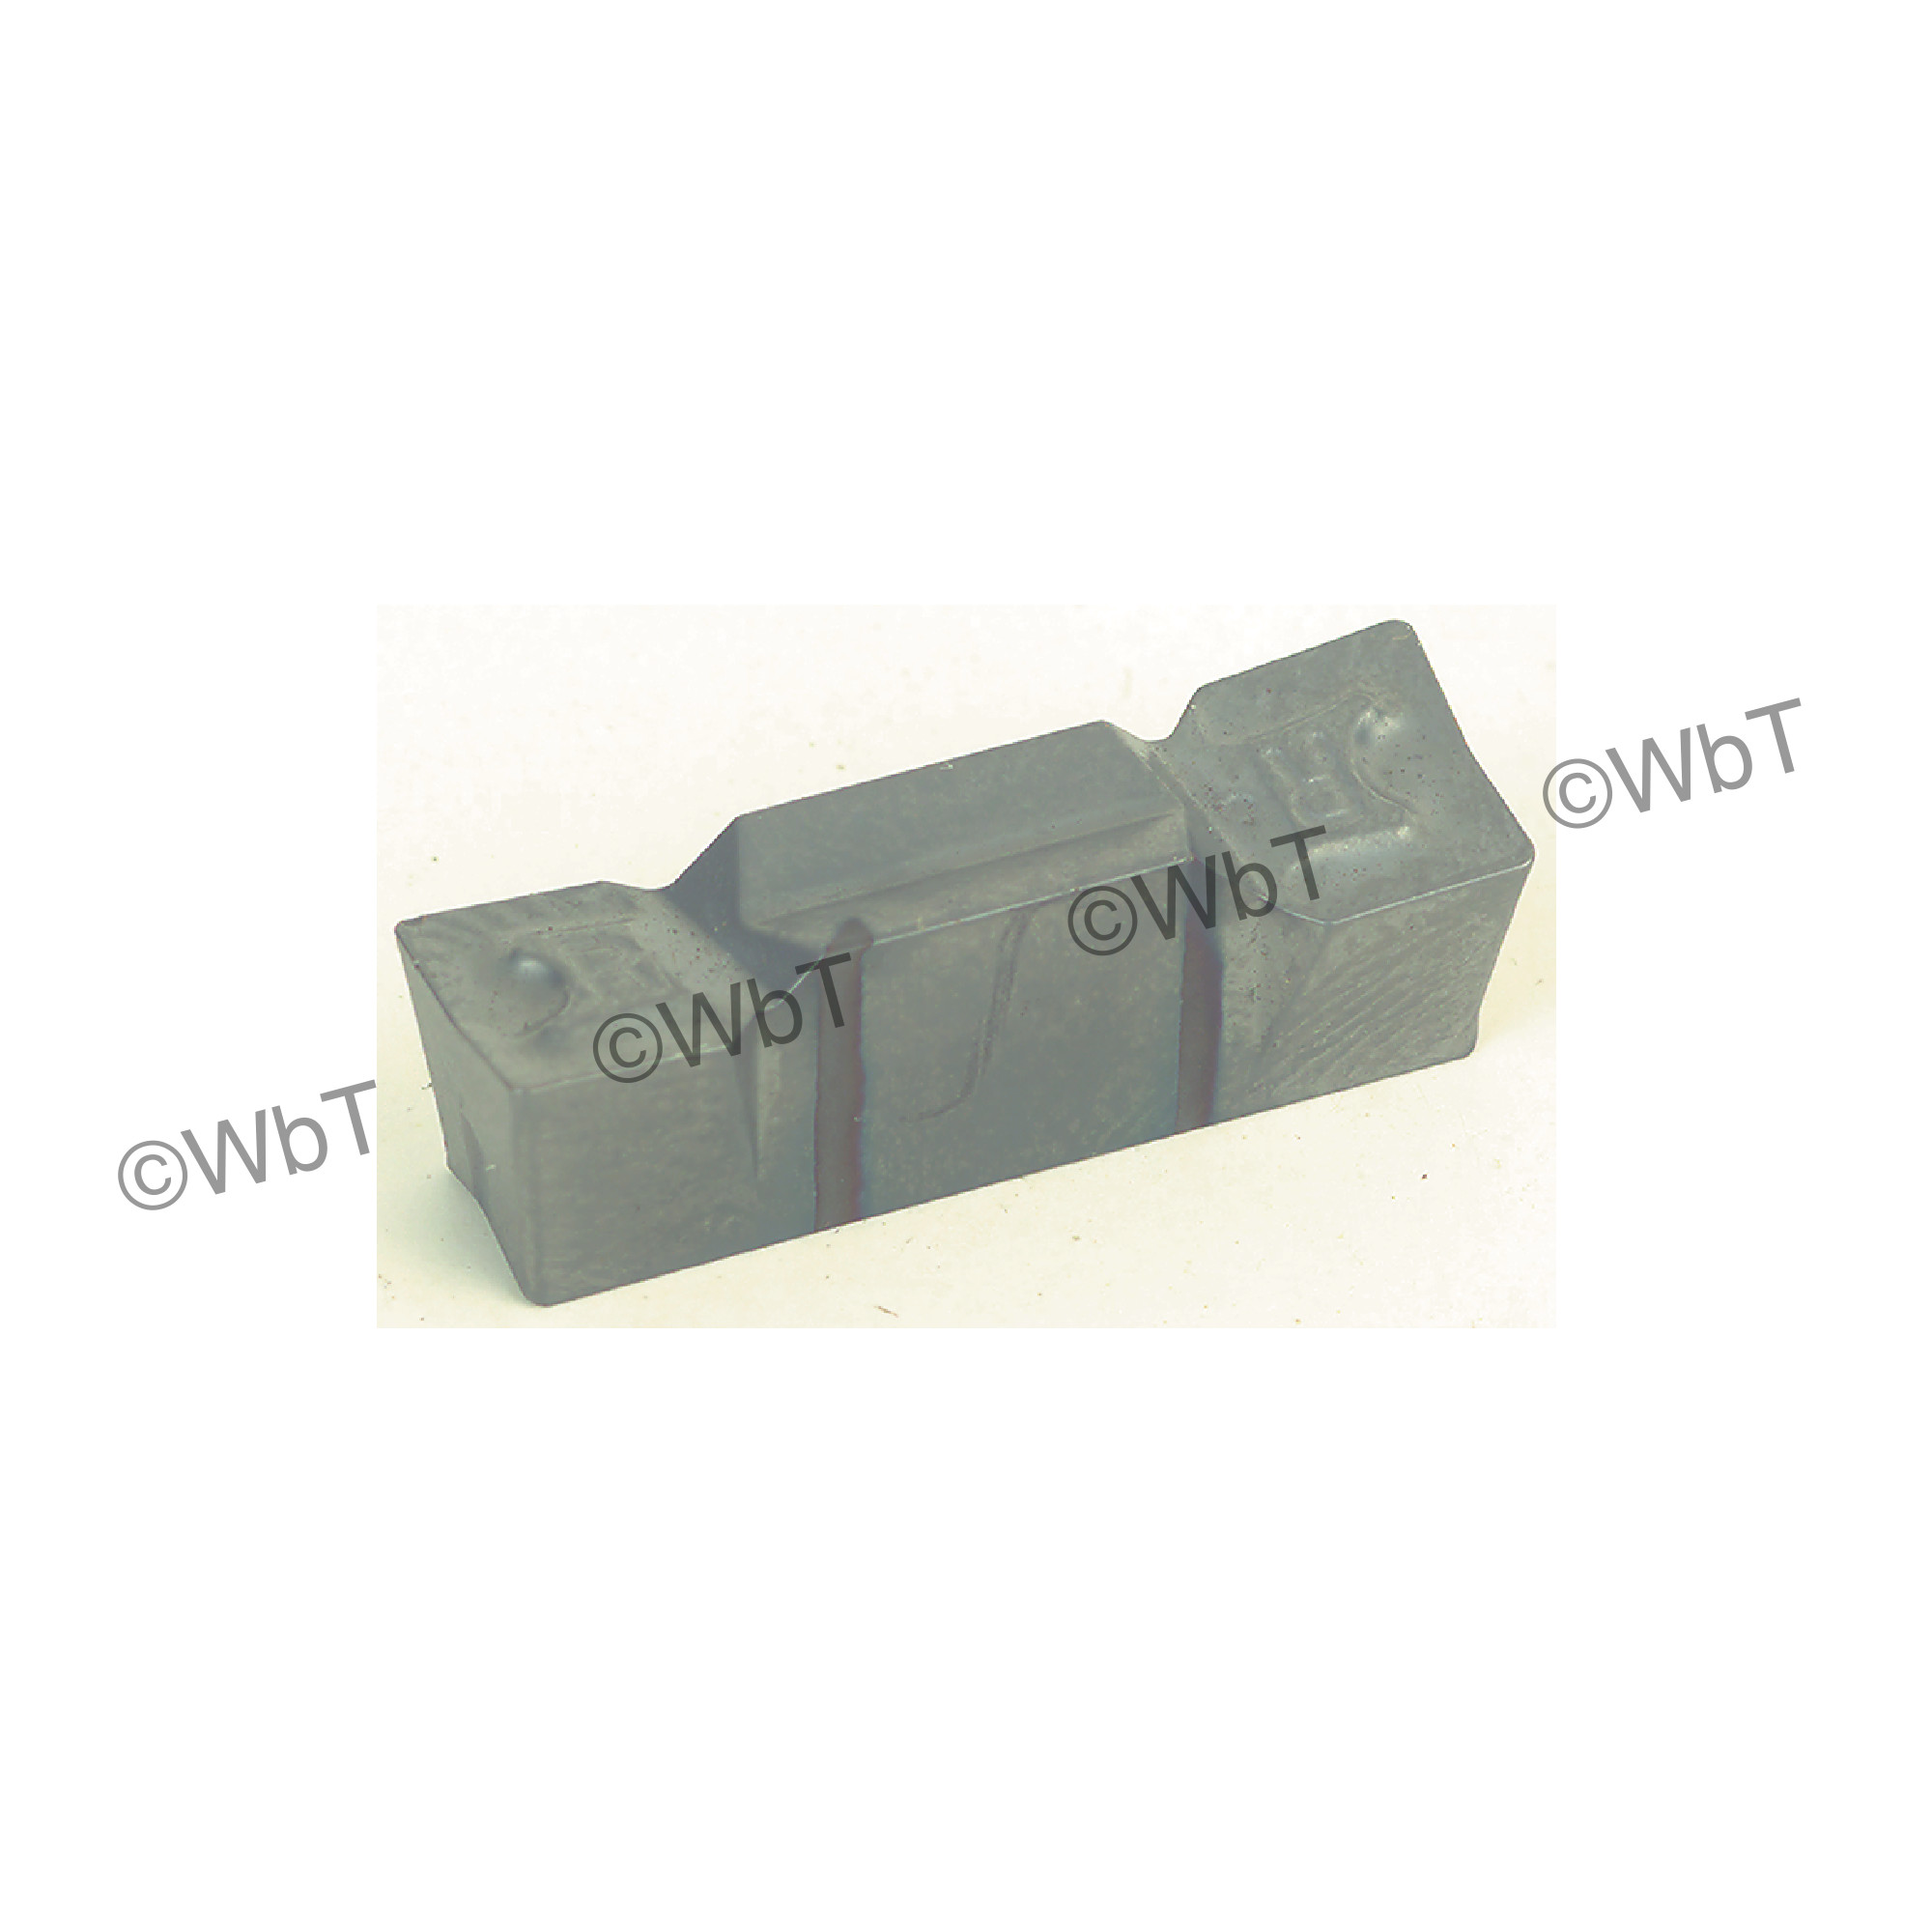 ISCAR - HFPR 6004 IC354 / HFPR/L - HELIFACE Indexable Carbide Insert / 0.236" Cutting Width